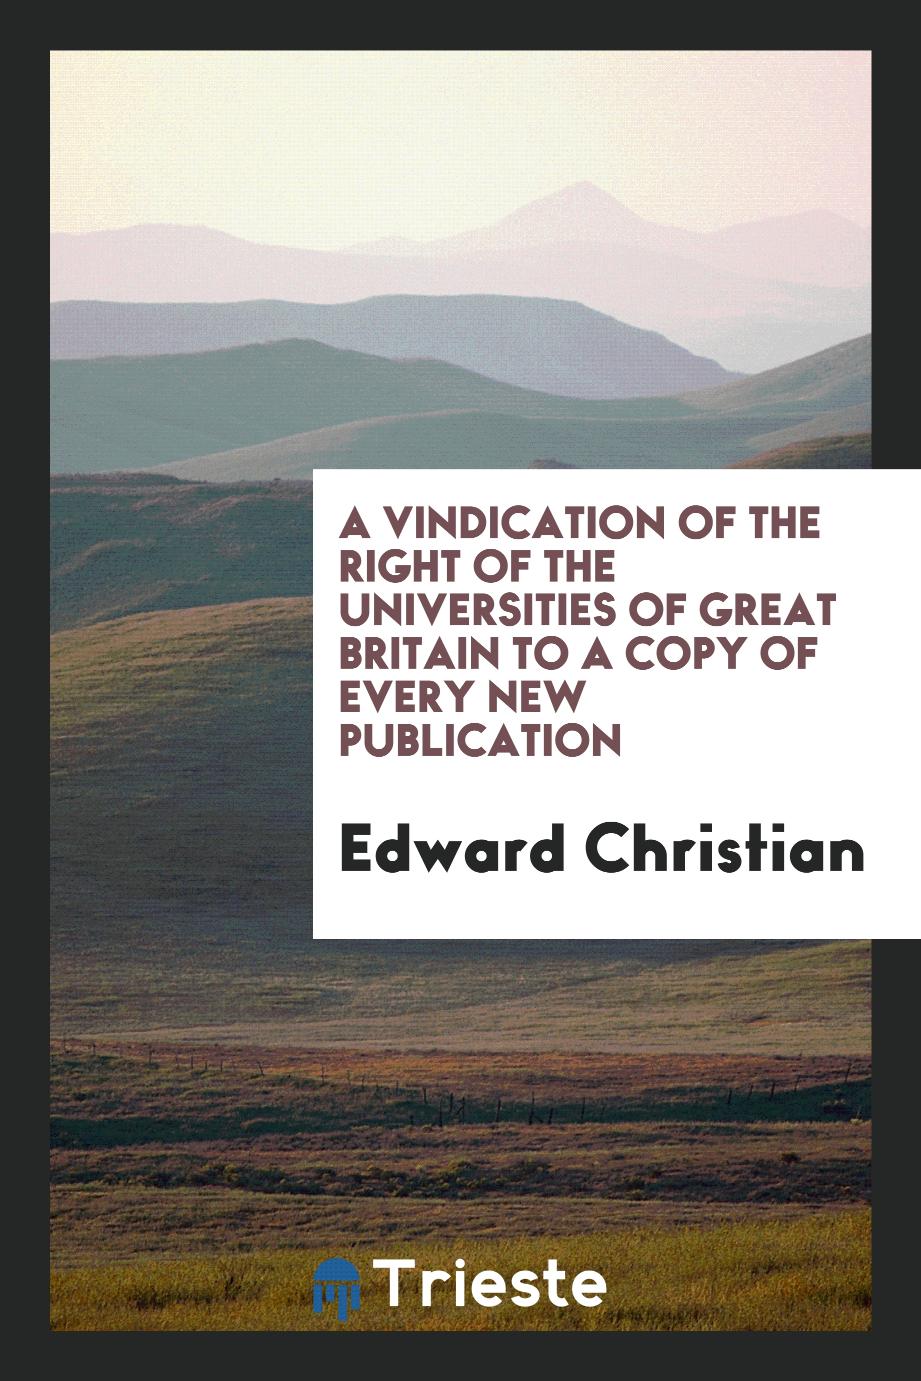 A Vindication of the Right of the Universities of Great Britain to a Copy of Every New Publication